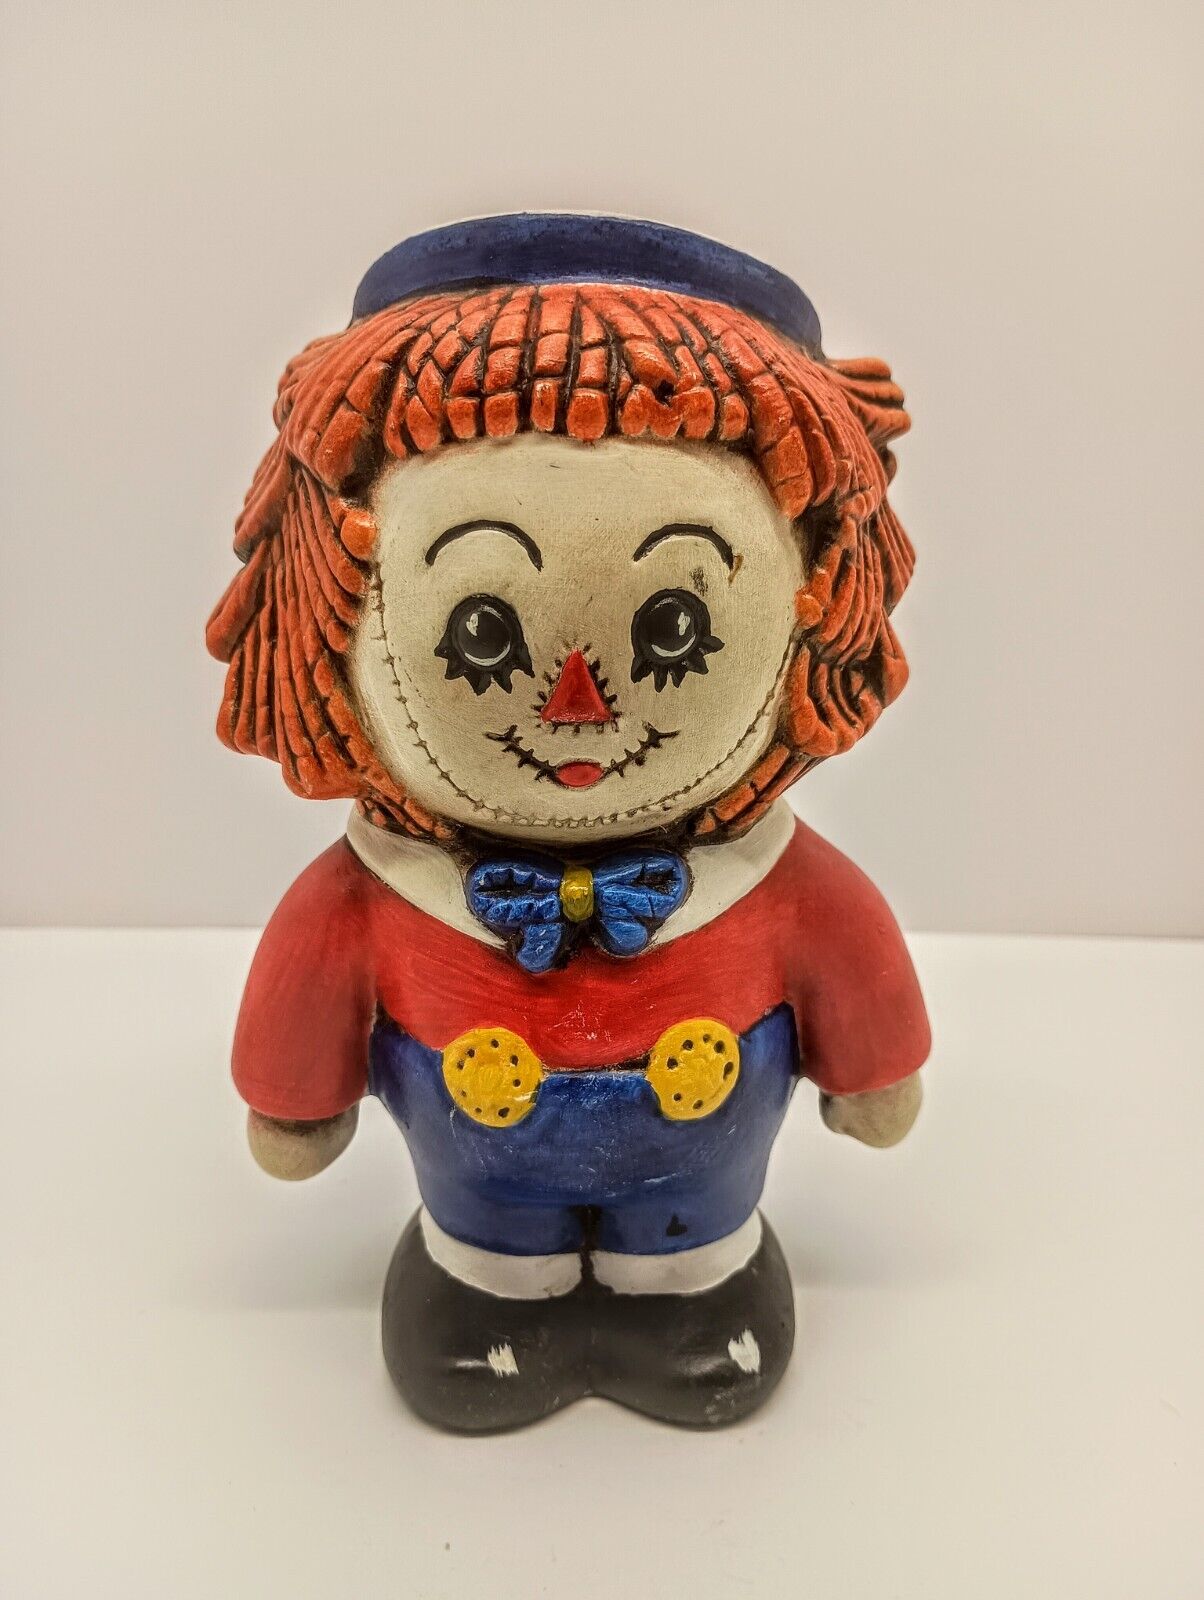 Vintage 1973 Hand Painted Ceramic Raggedy Andy Decorative Figurine 7